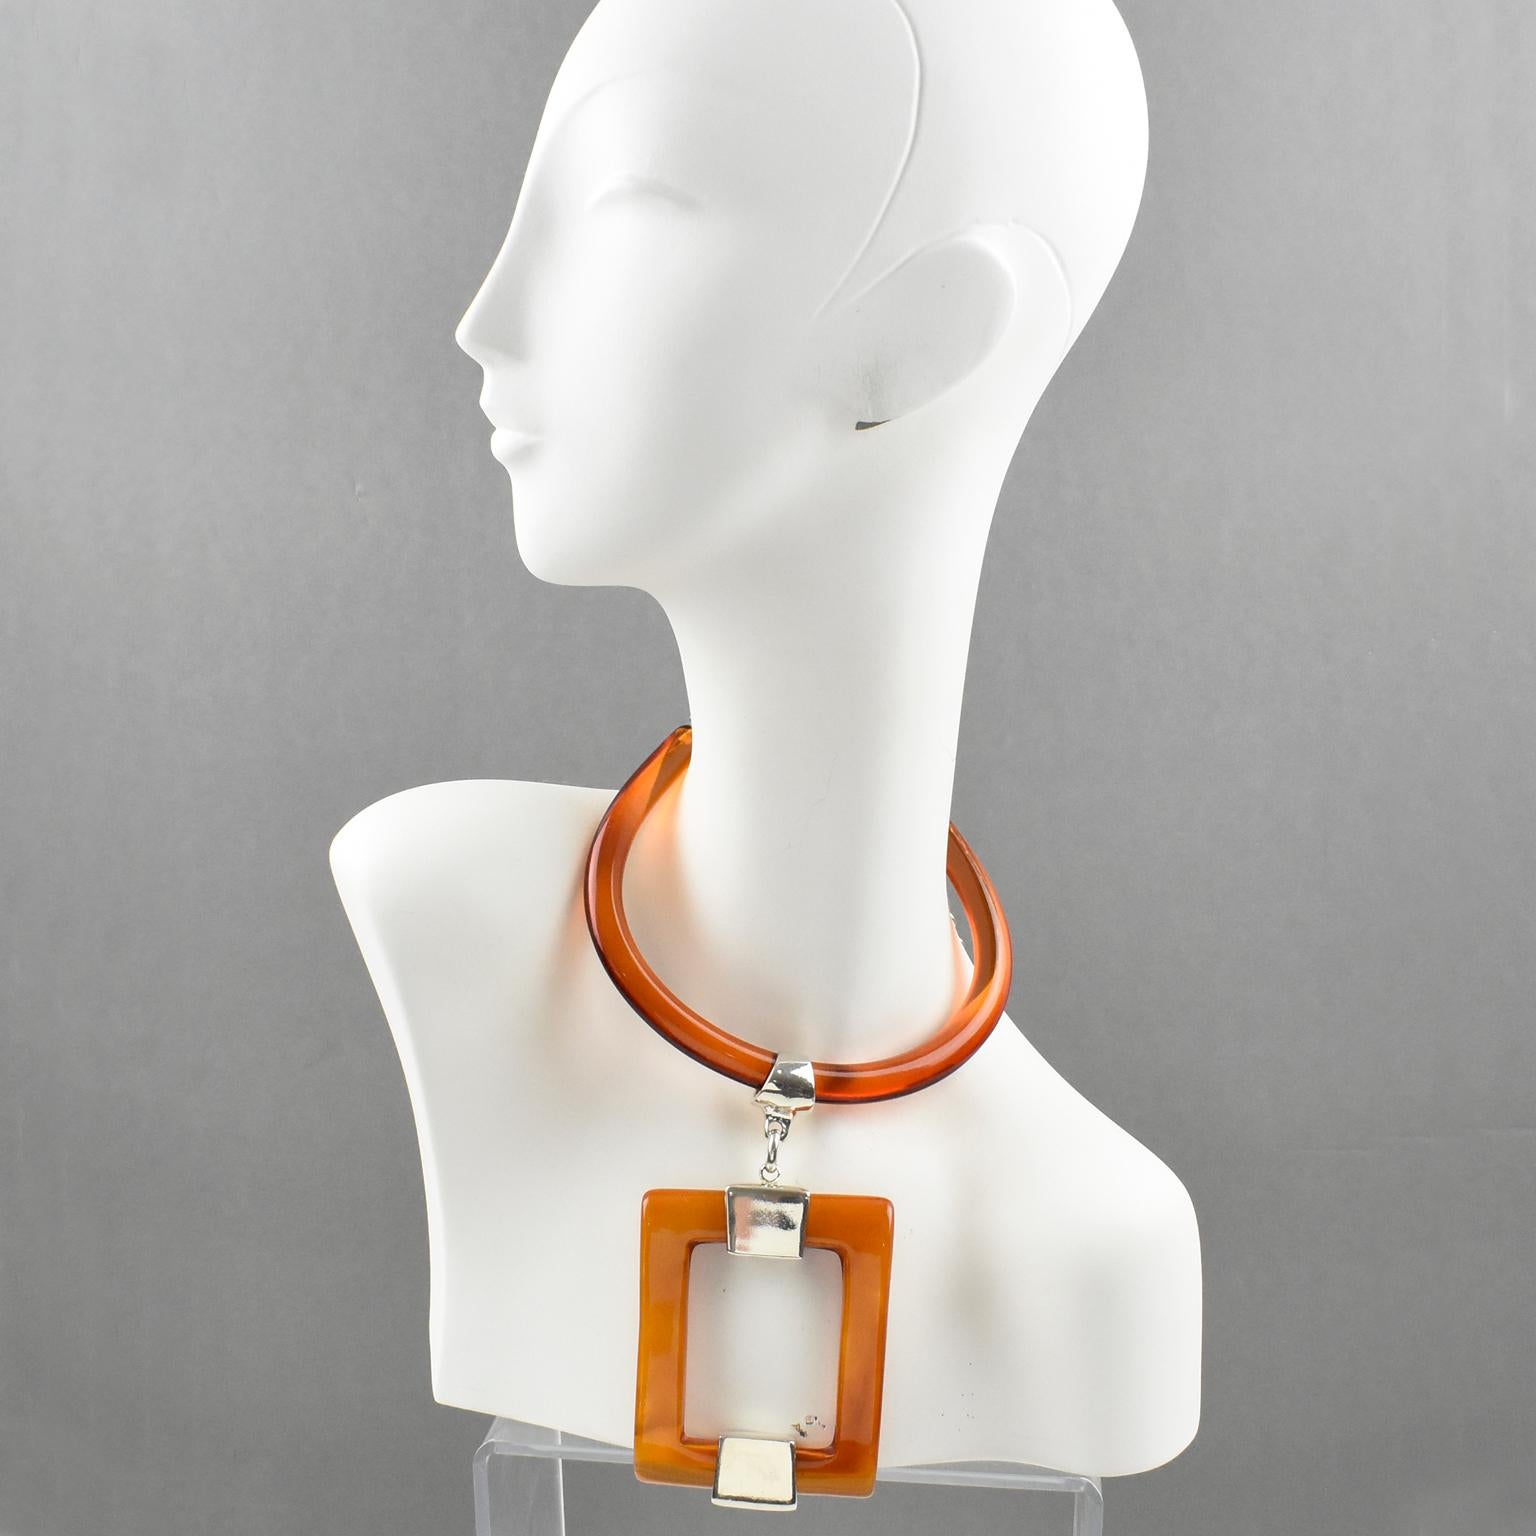 Amazing Dominique Denaive Paris signed pendant necklace. Modernist statement design with resin and silvered metal featuring a rigid neck band ornate with a huge geometric pendant. Lovely transparent orange and orange amber marble colors. Lobster